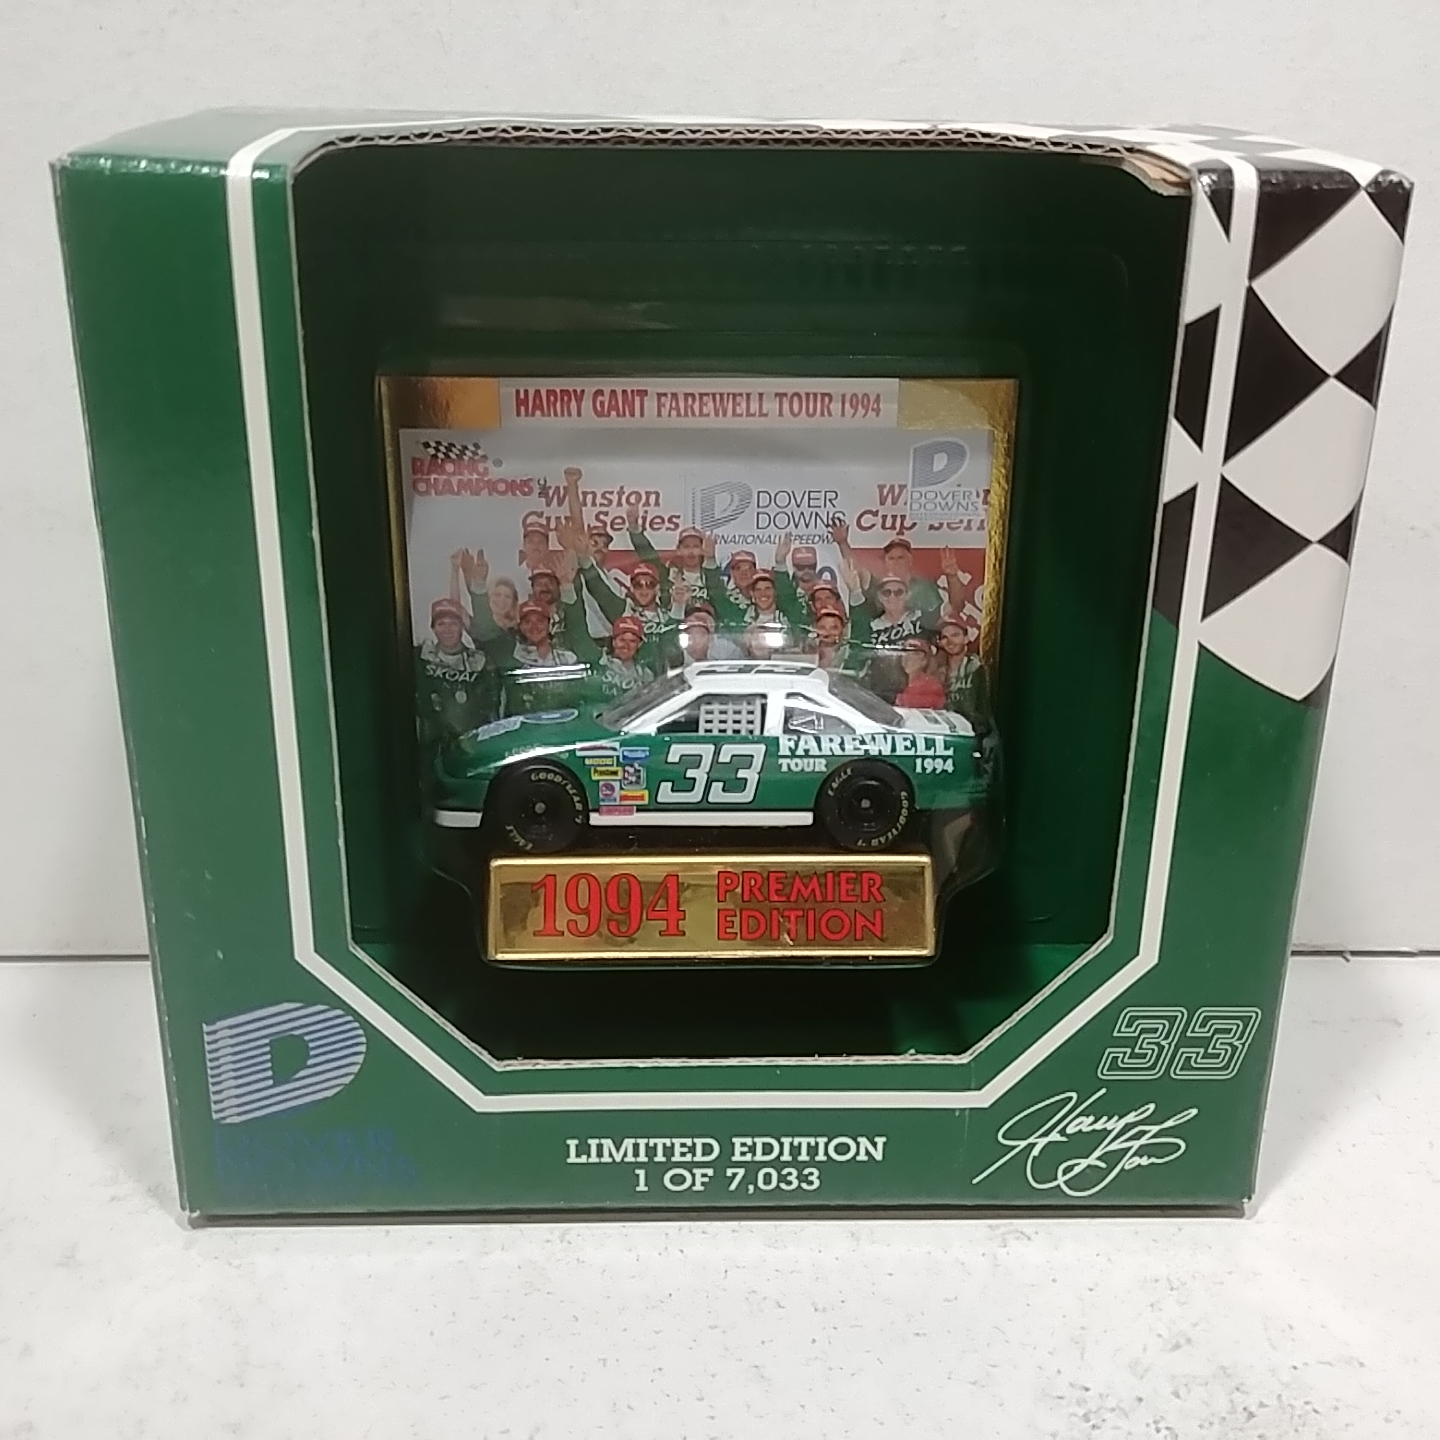 1994 Harry Gant 1/64th Racing Champions "Farewell Tour" Dover car